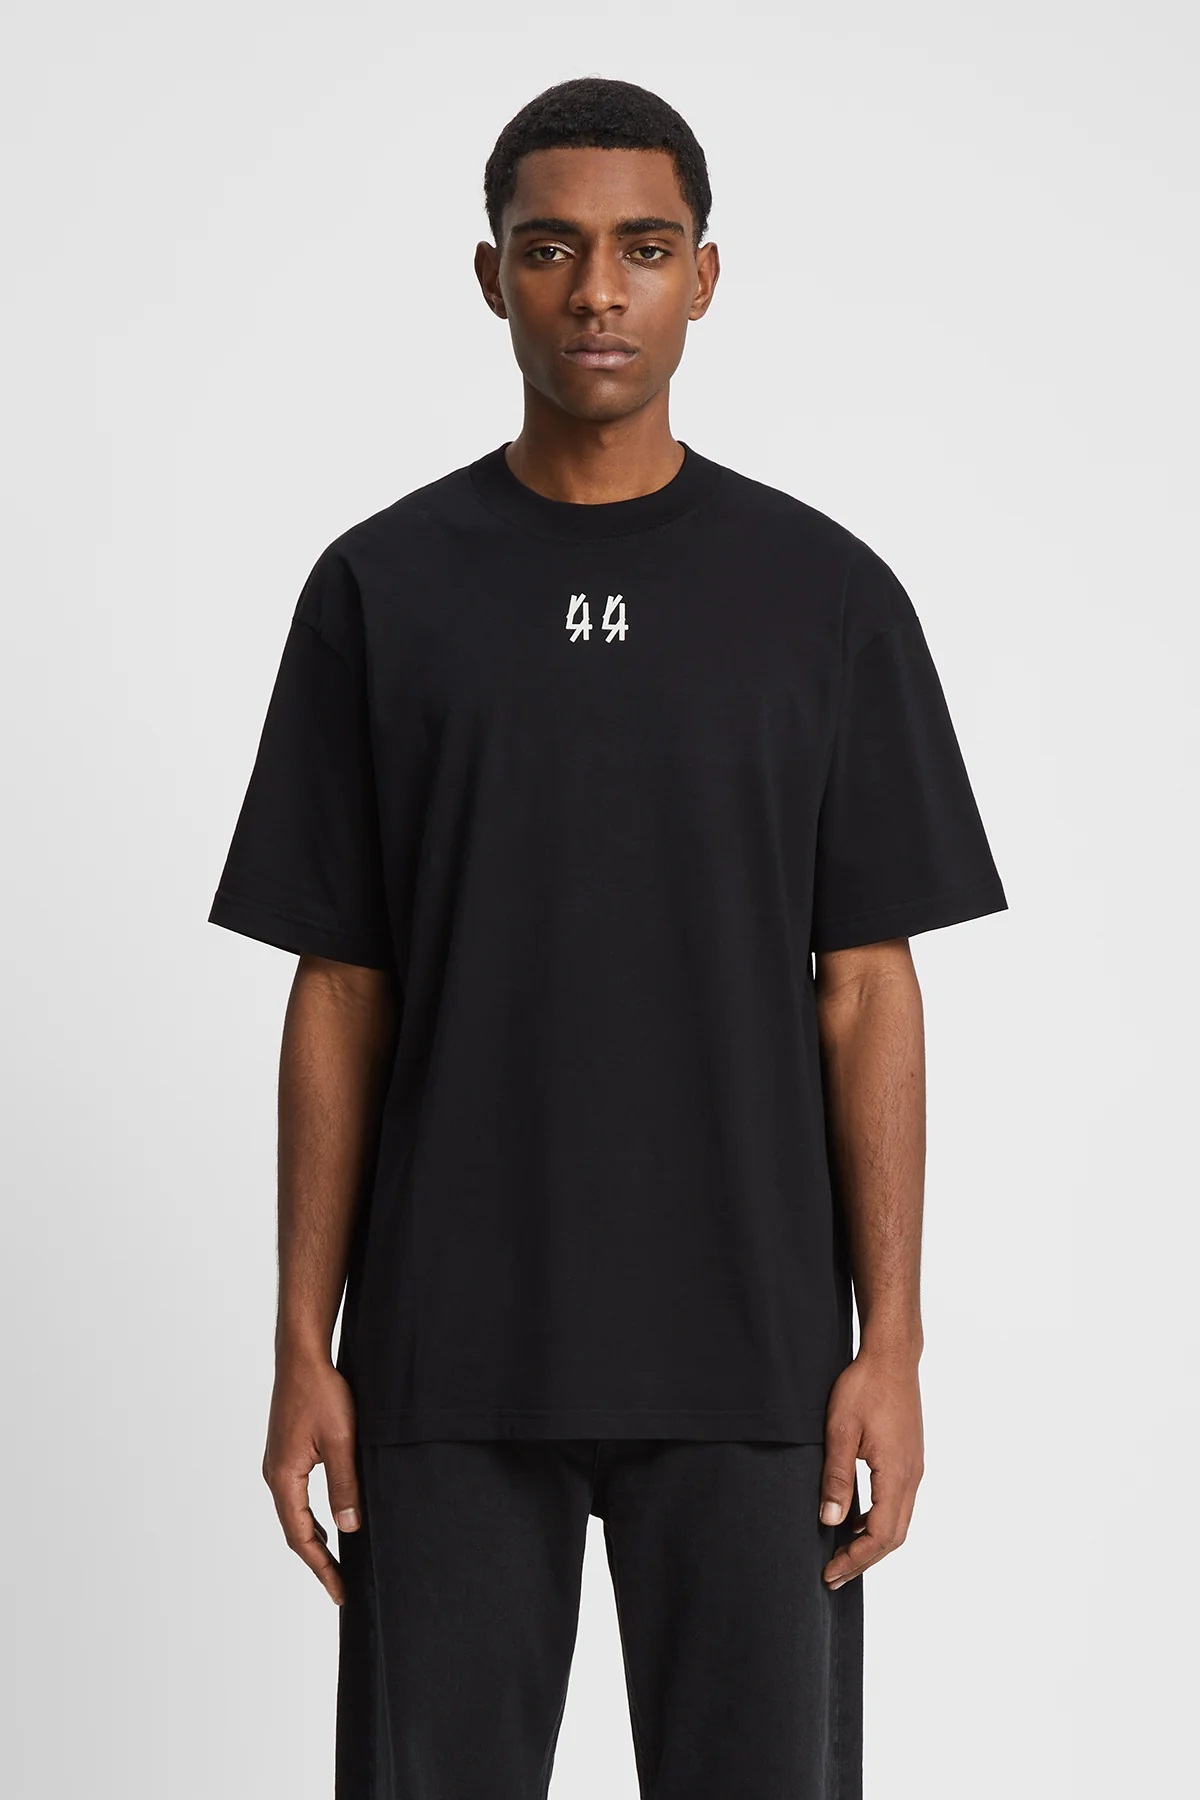 44 LABEL GROUP Continuum T-Shirt in Black L